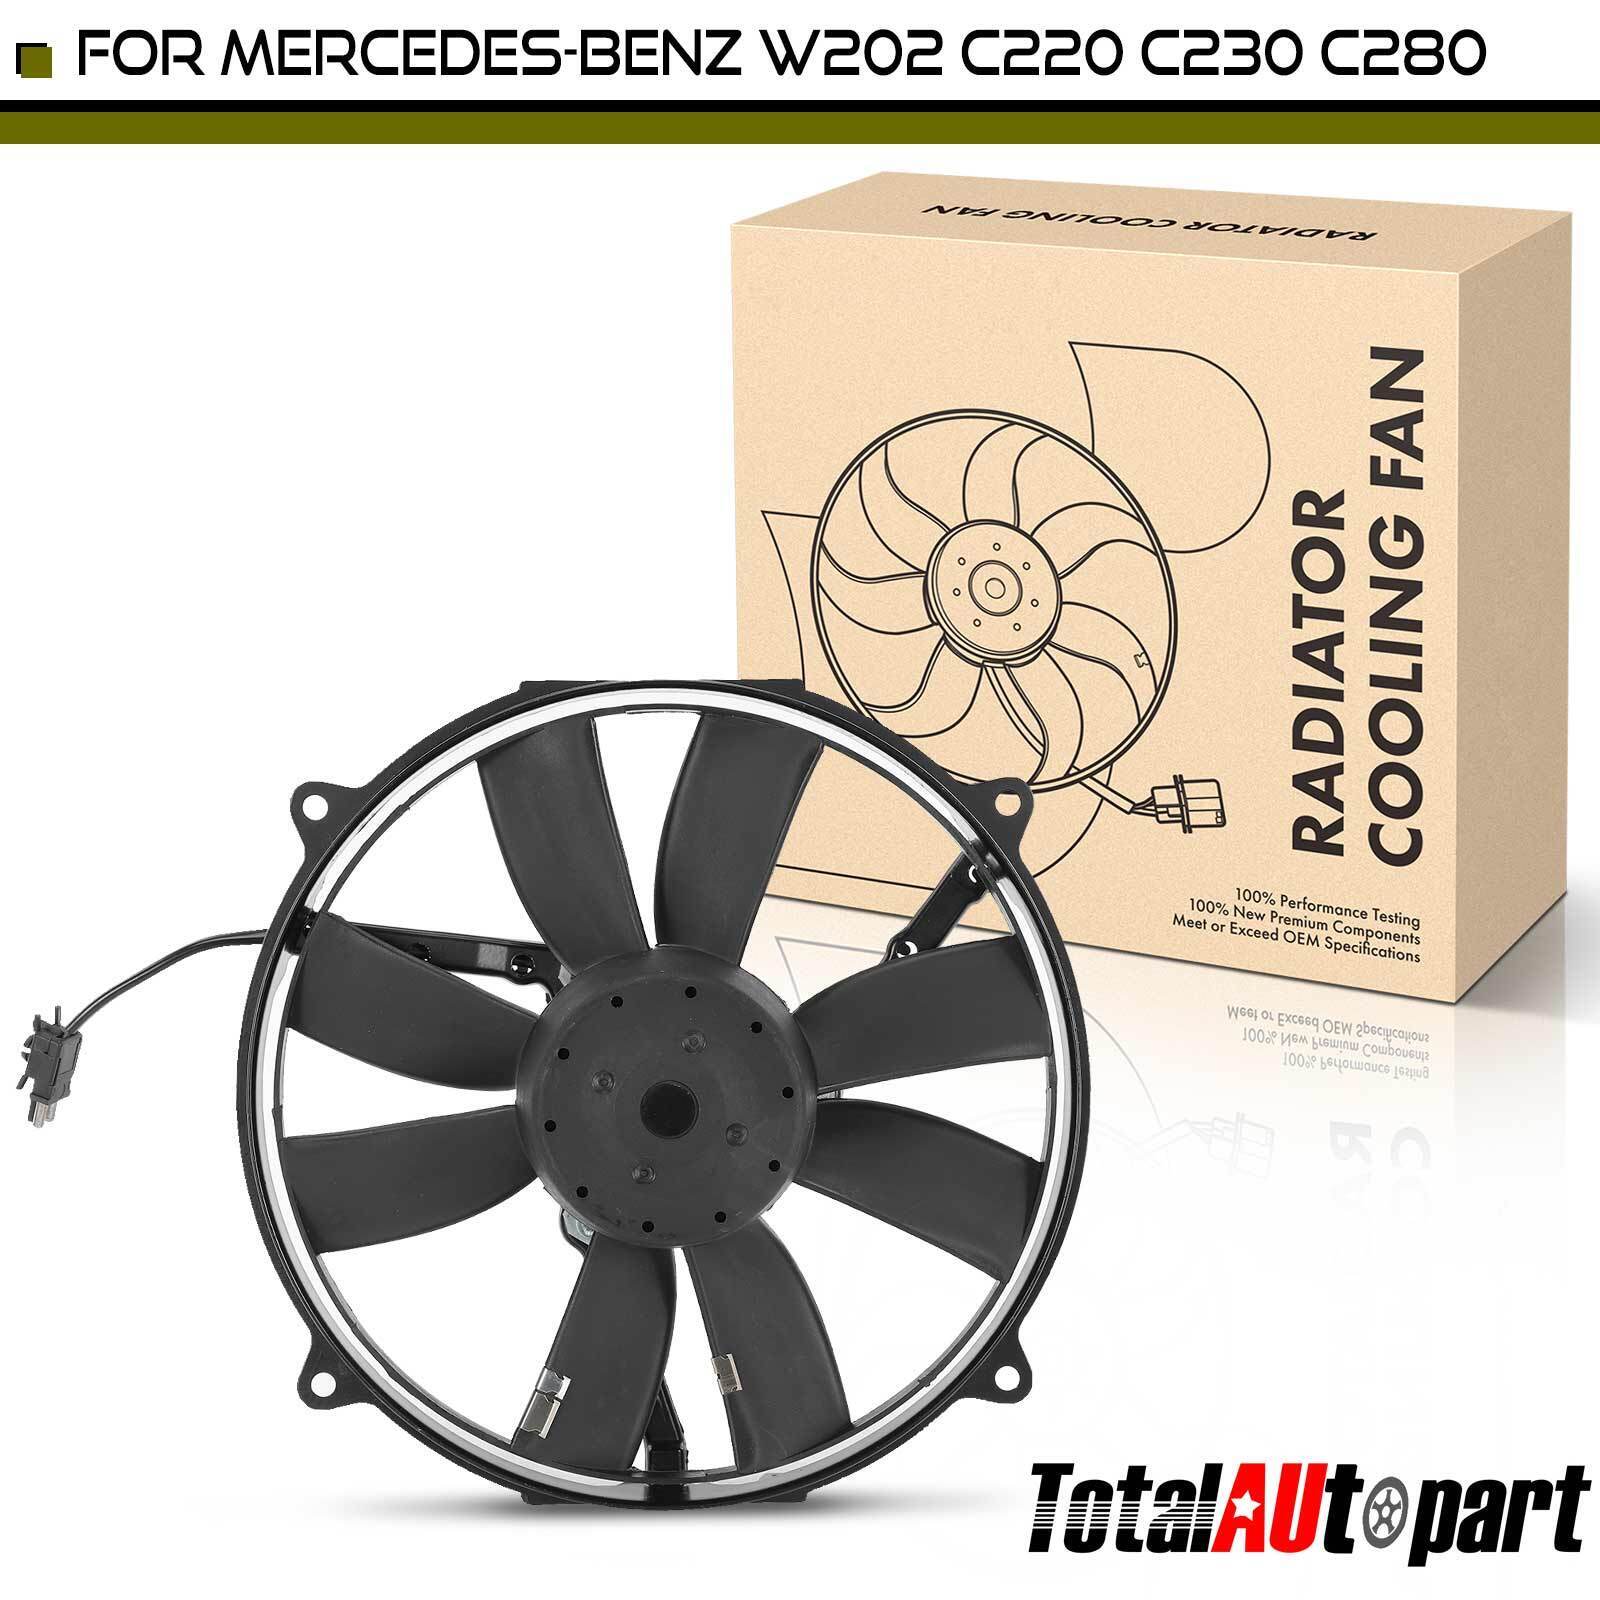 Engine Radiator Cooling Fan Assembly for Mercedes-Benz W202 C220 C230 C280 Left